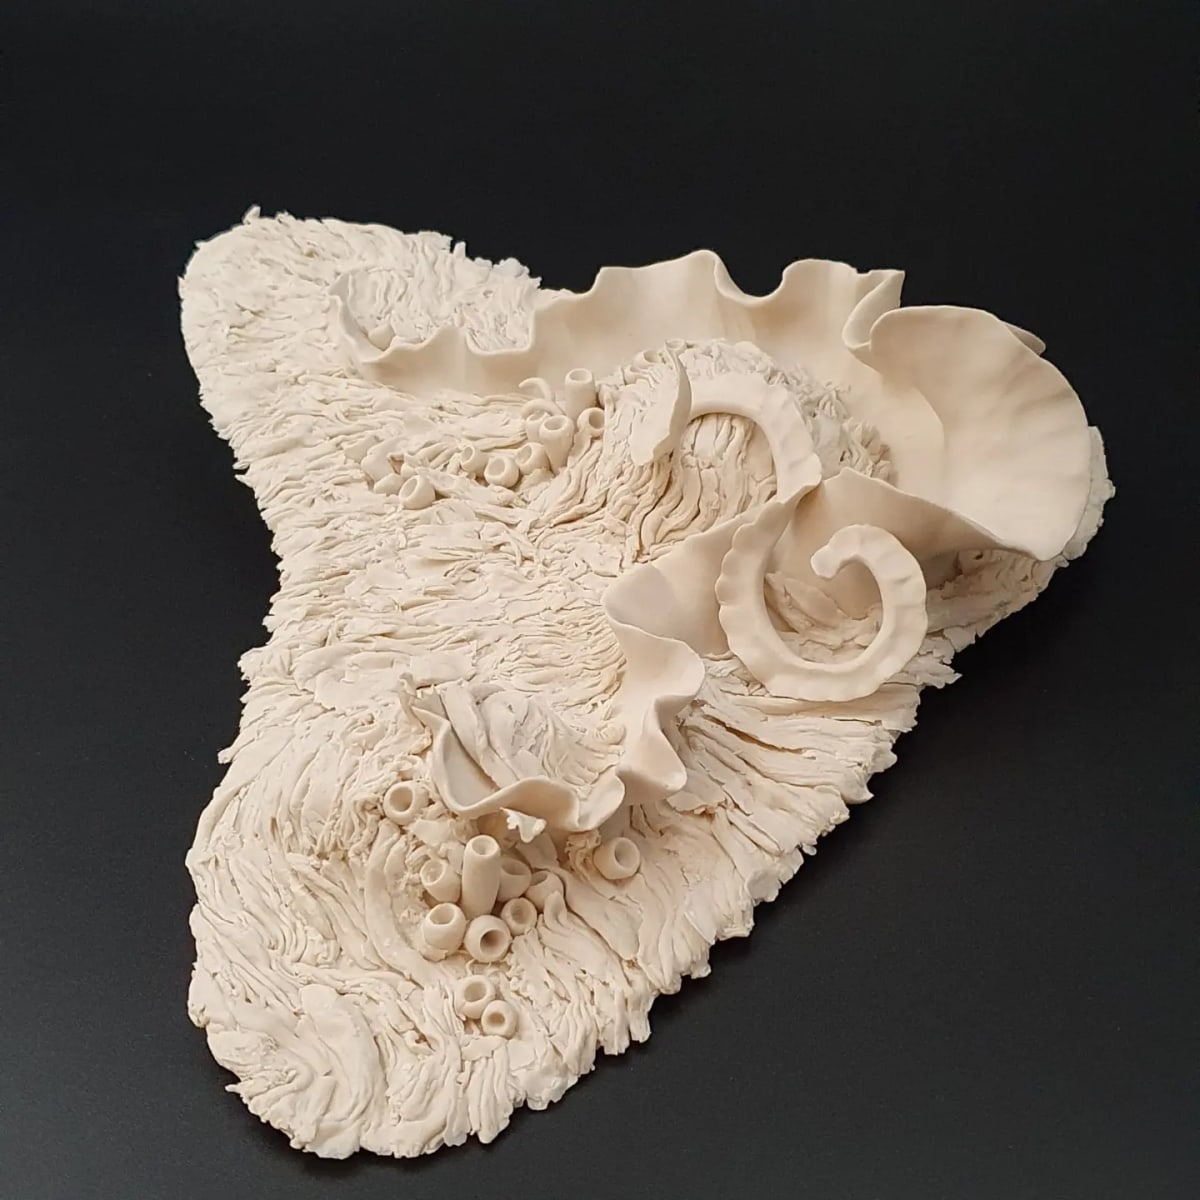 "No. 3," Seascape Series - porcelain wall sculpture by Sylvie Pool Alvarez  Image: No. 3 viewed from slightly below